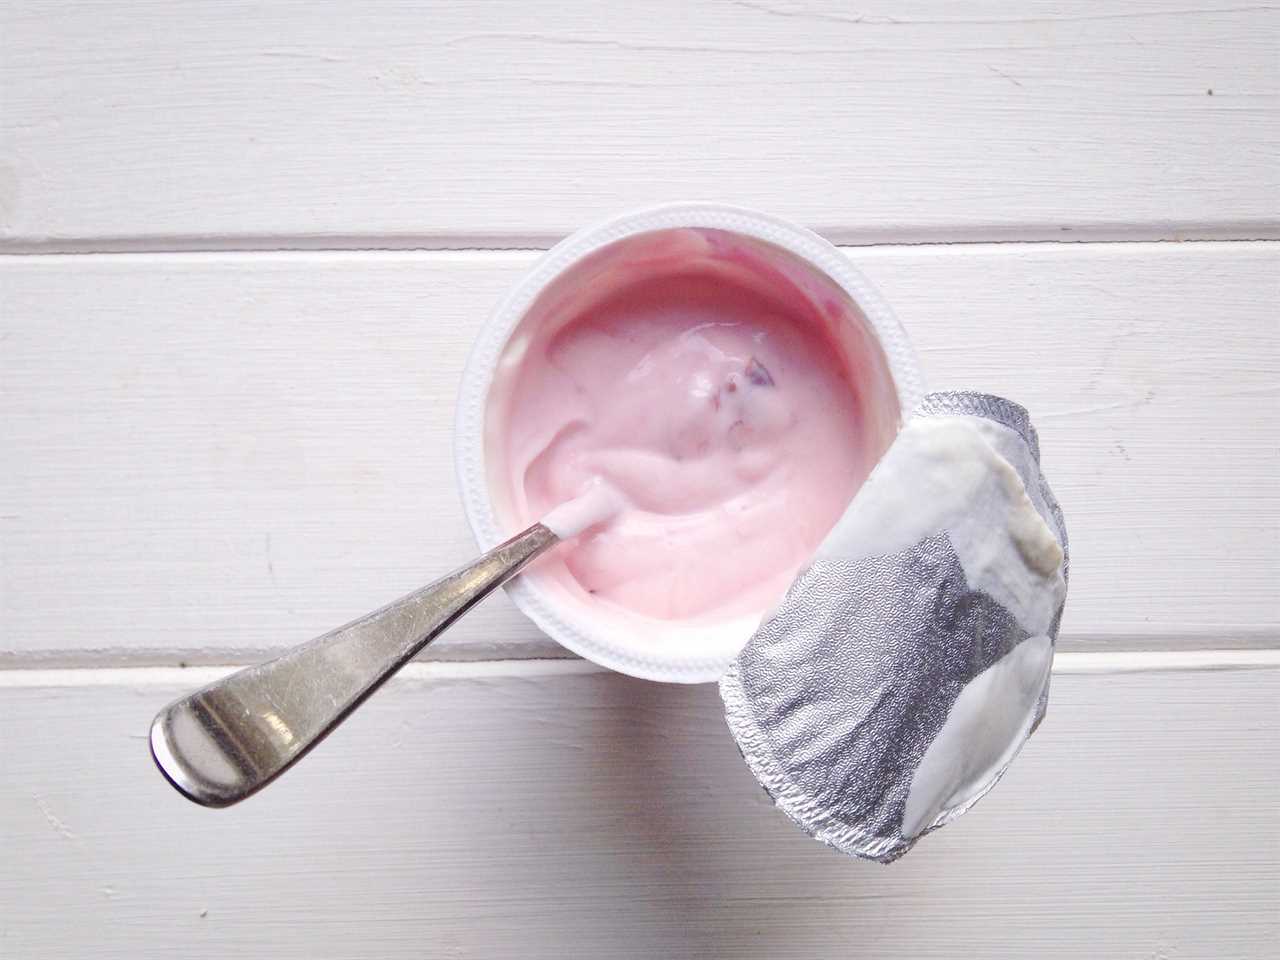 Yoghurt has been found to reduce the likelihood of abnormal growths becoming cancerous